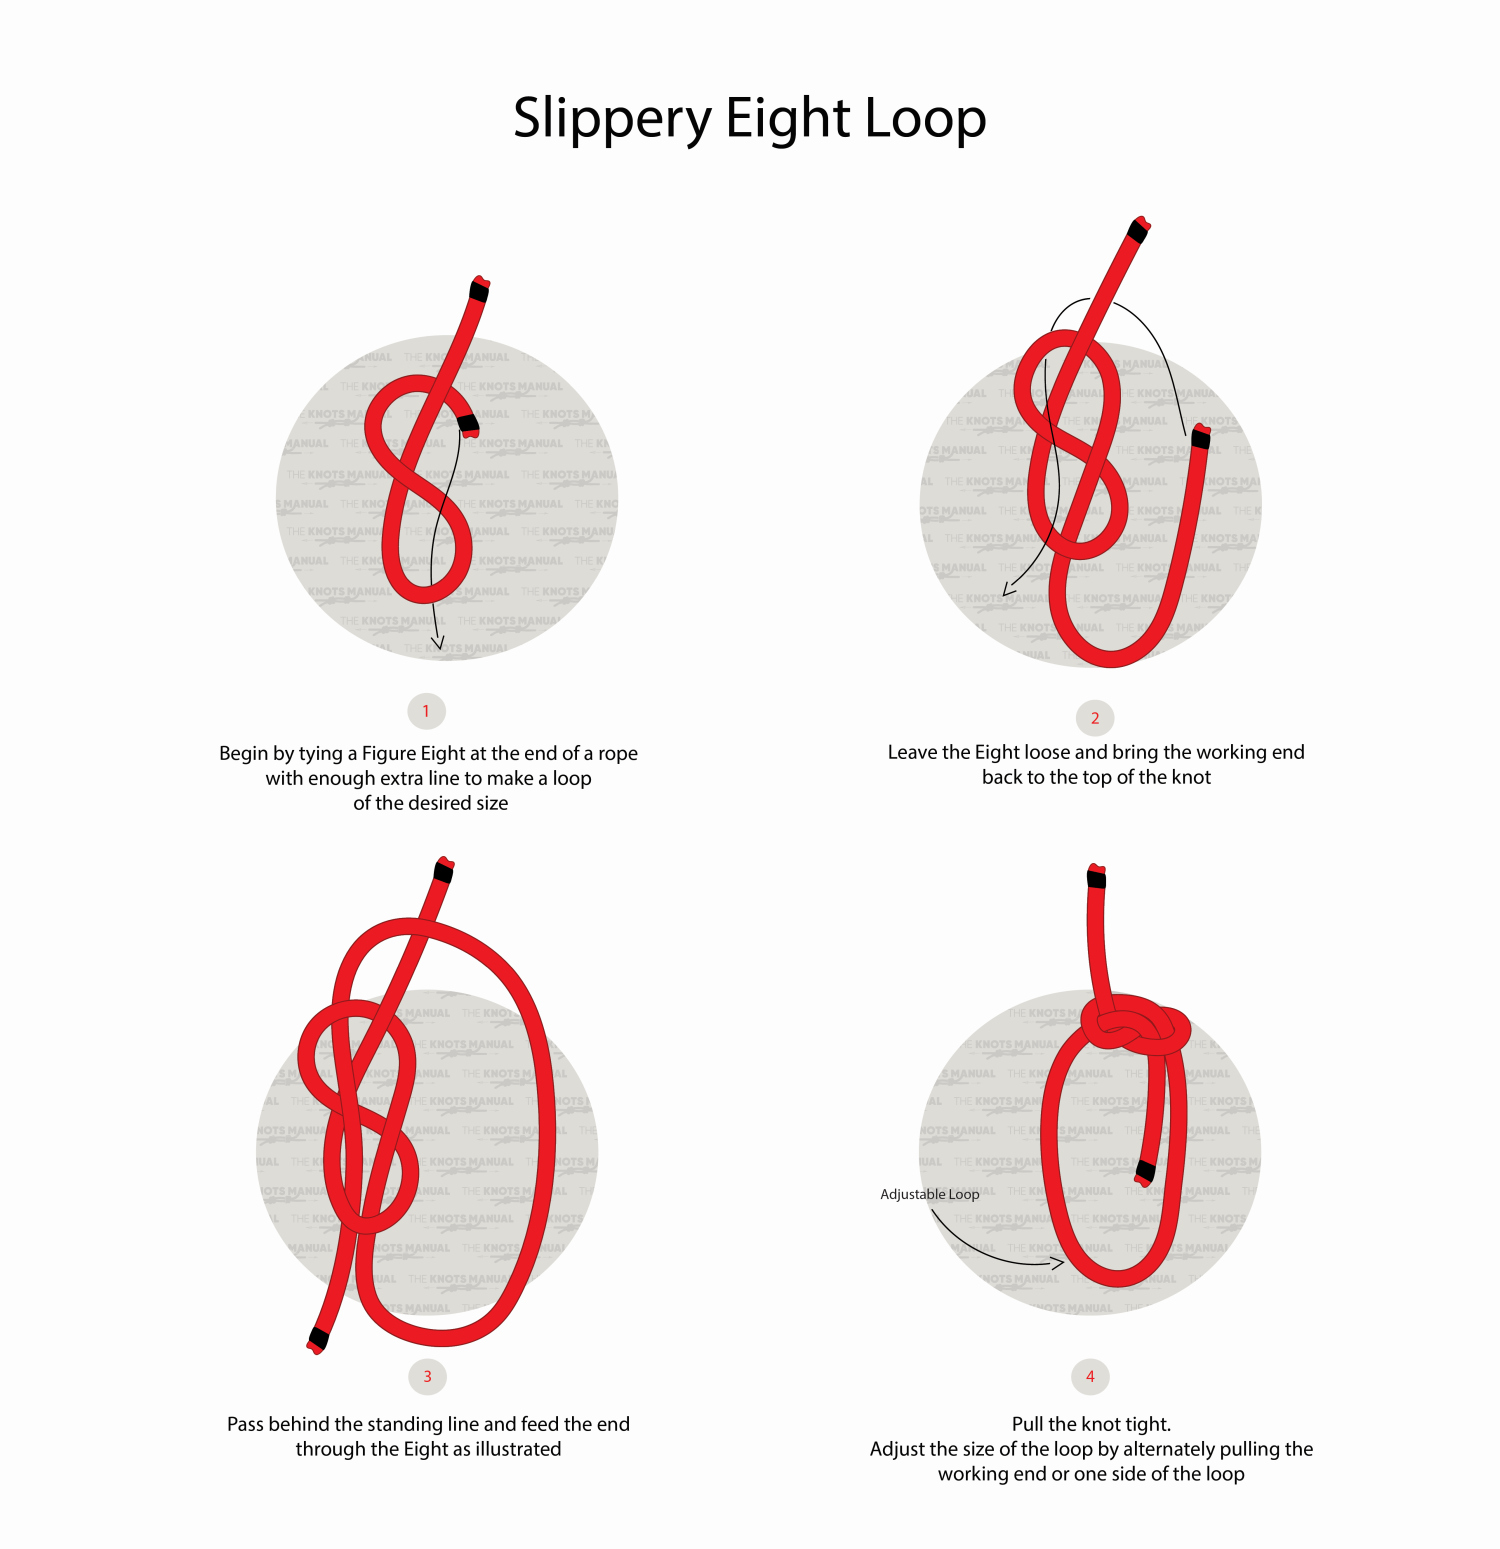 Illustrated Guide: How to Tie the Slippery Eight Loop Knot